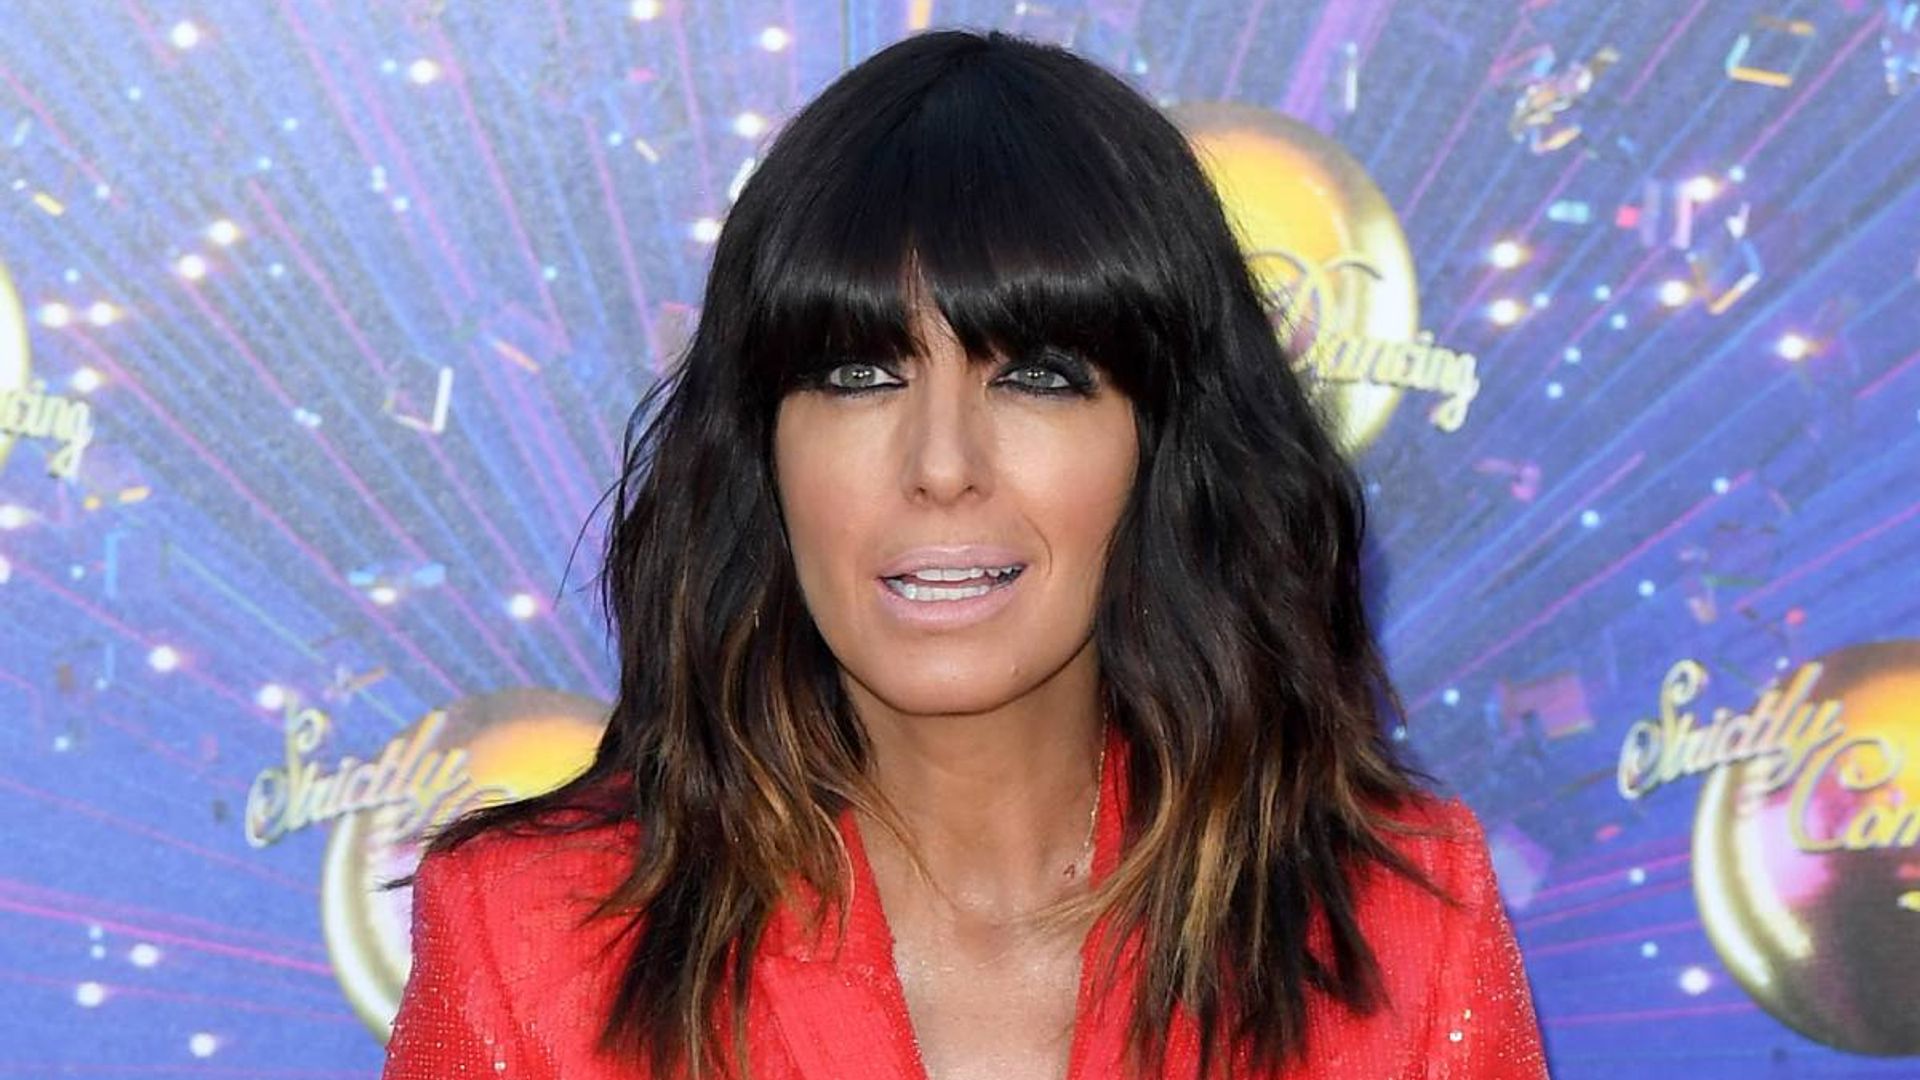 Claudia Winkleman's first Strictly Come Dancing outfit does not disappoint!